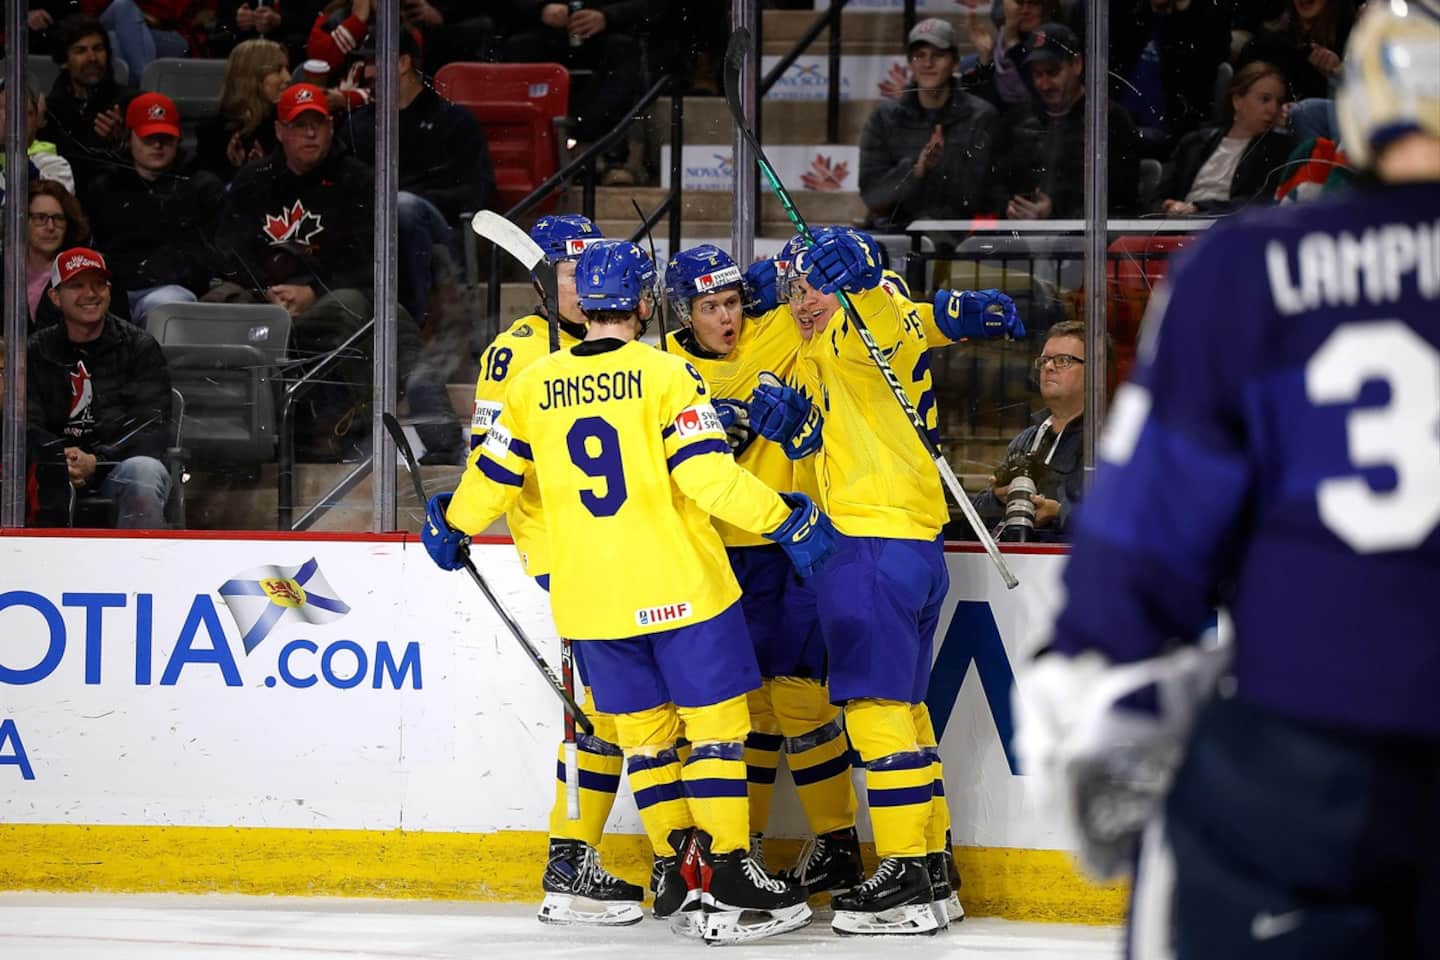 World Juniors: Sweden dismisses Finland at the end of the match